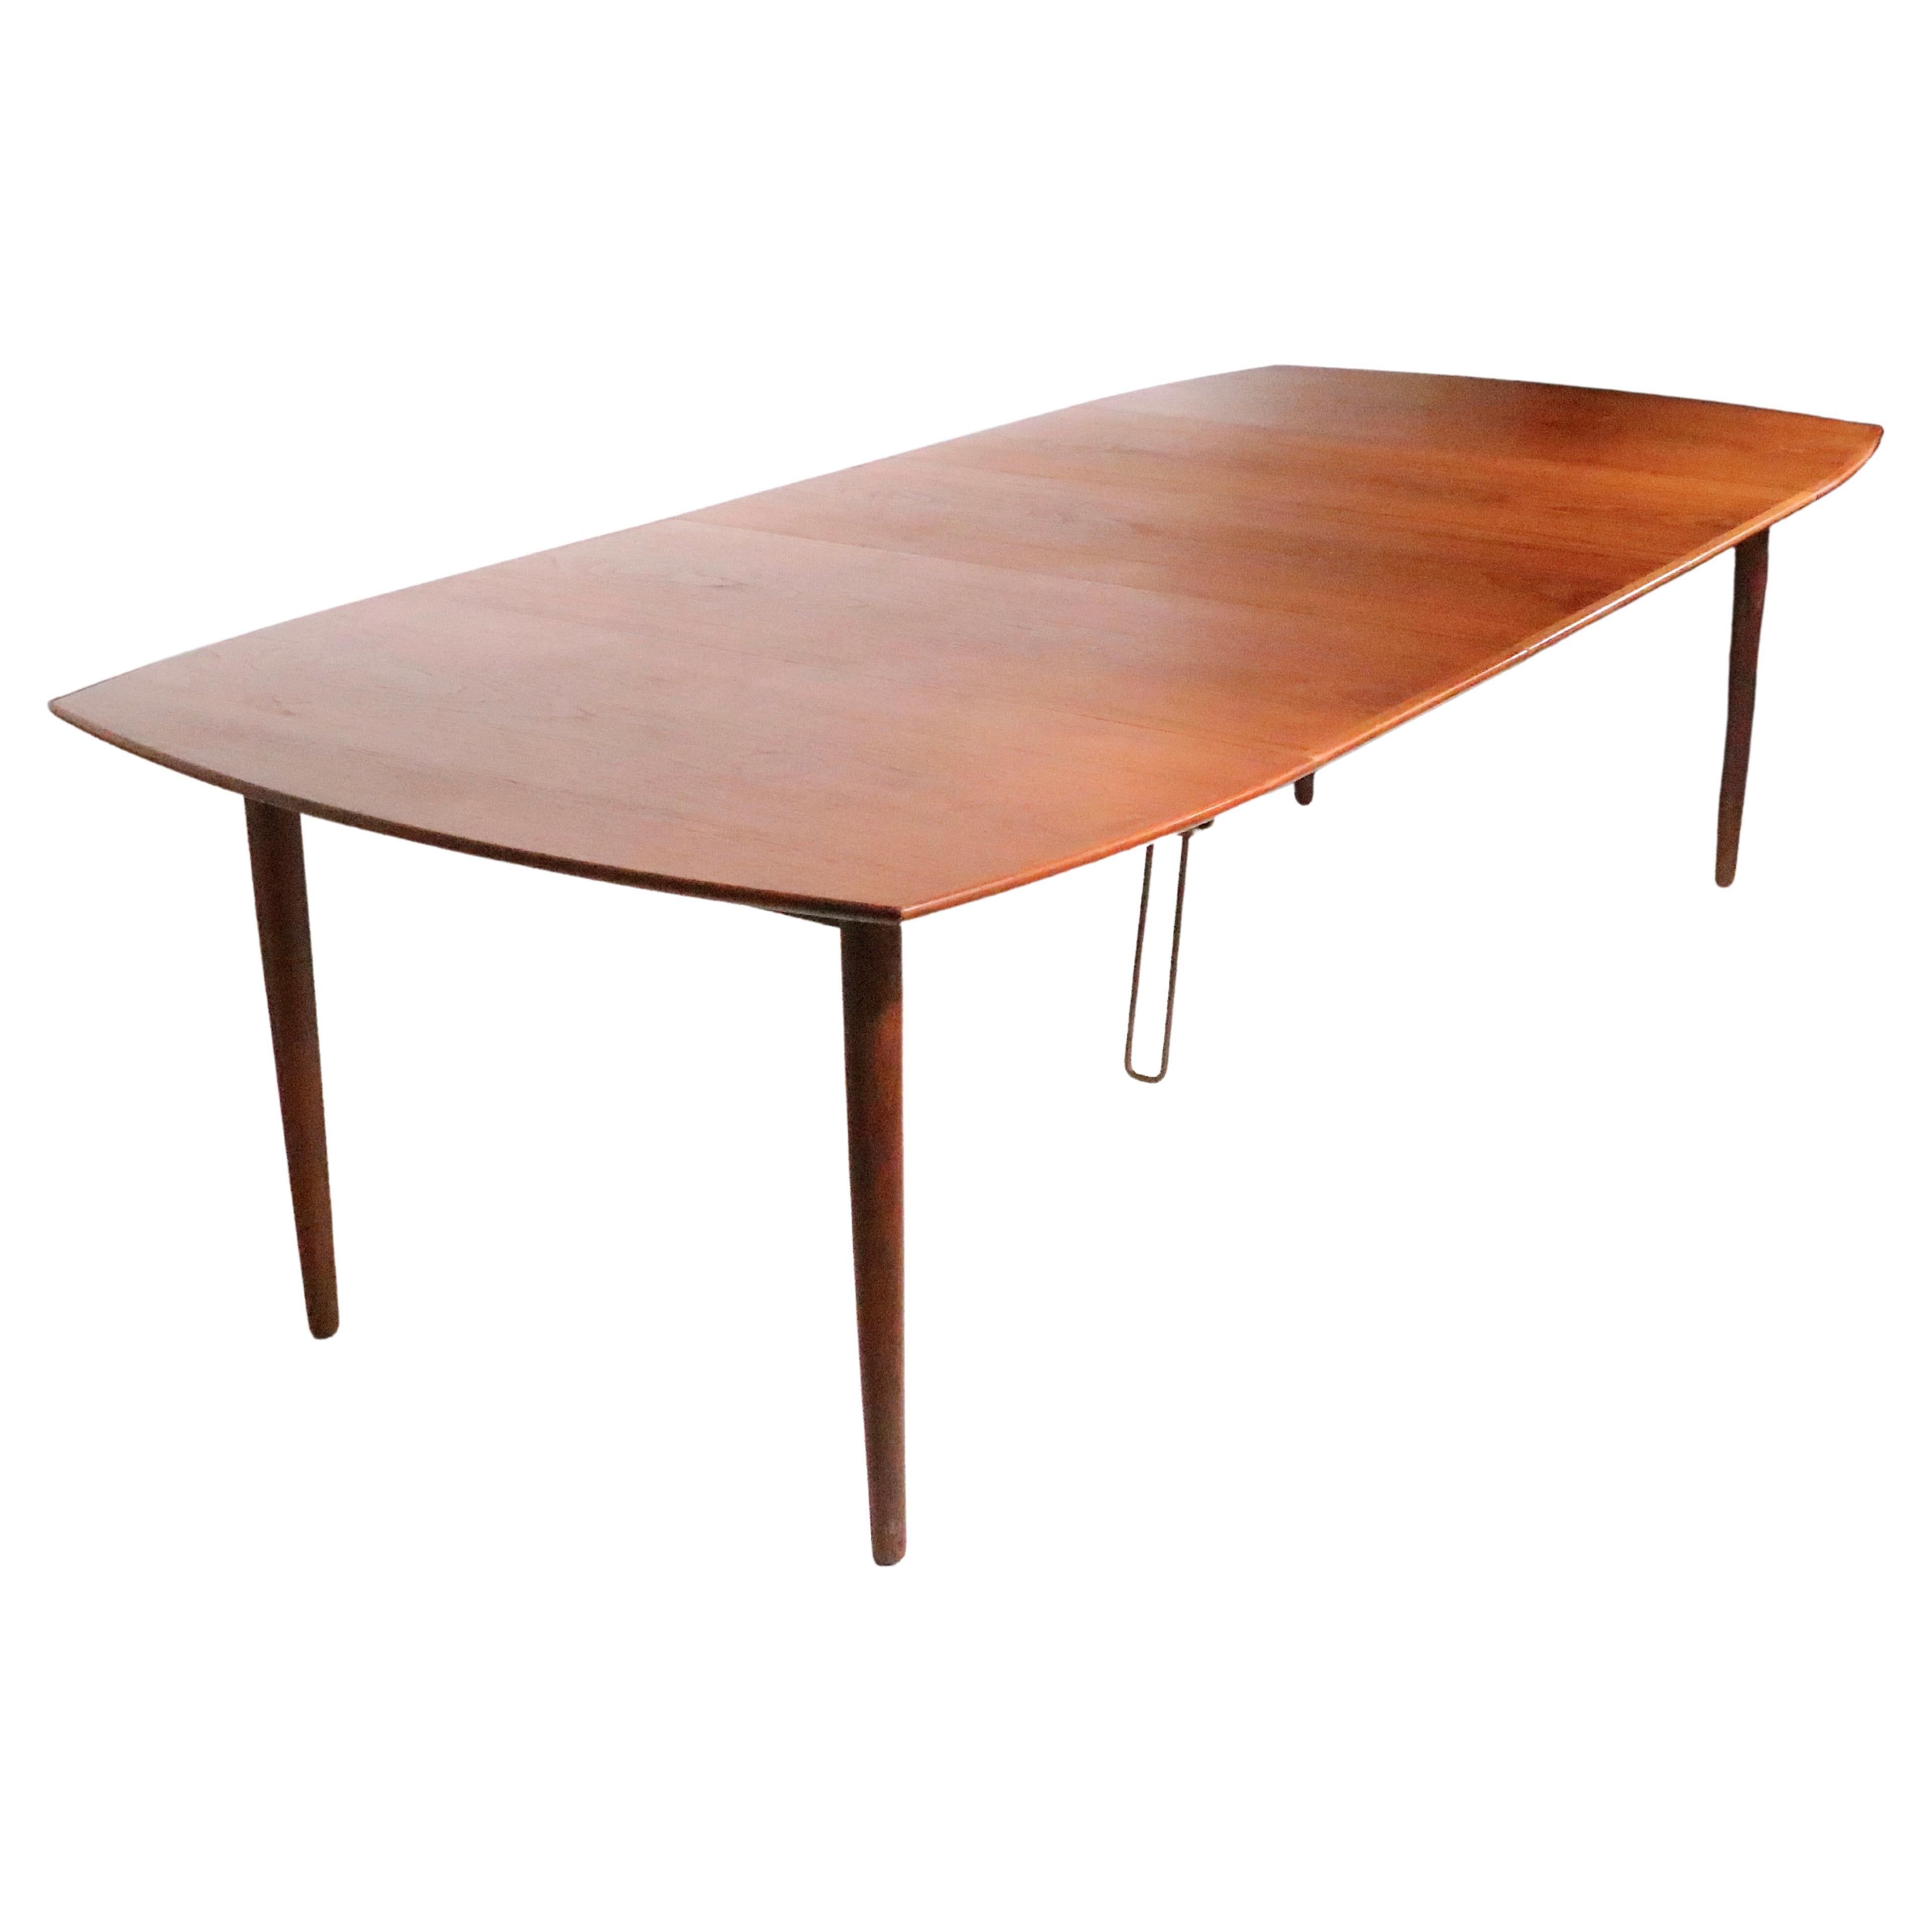 Danish Mid Century Modern Teak Extension  Dining Table by H W Klein  c 1950's For Sale